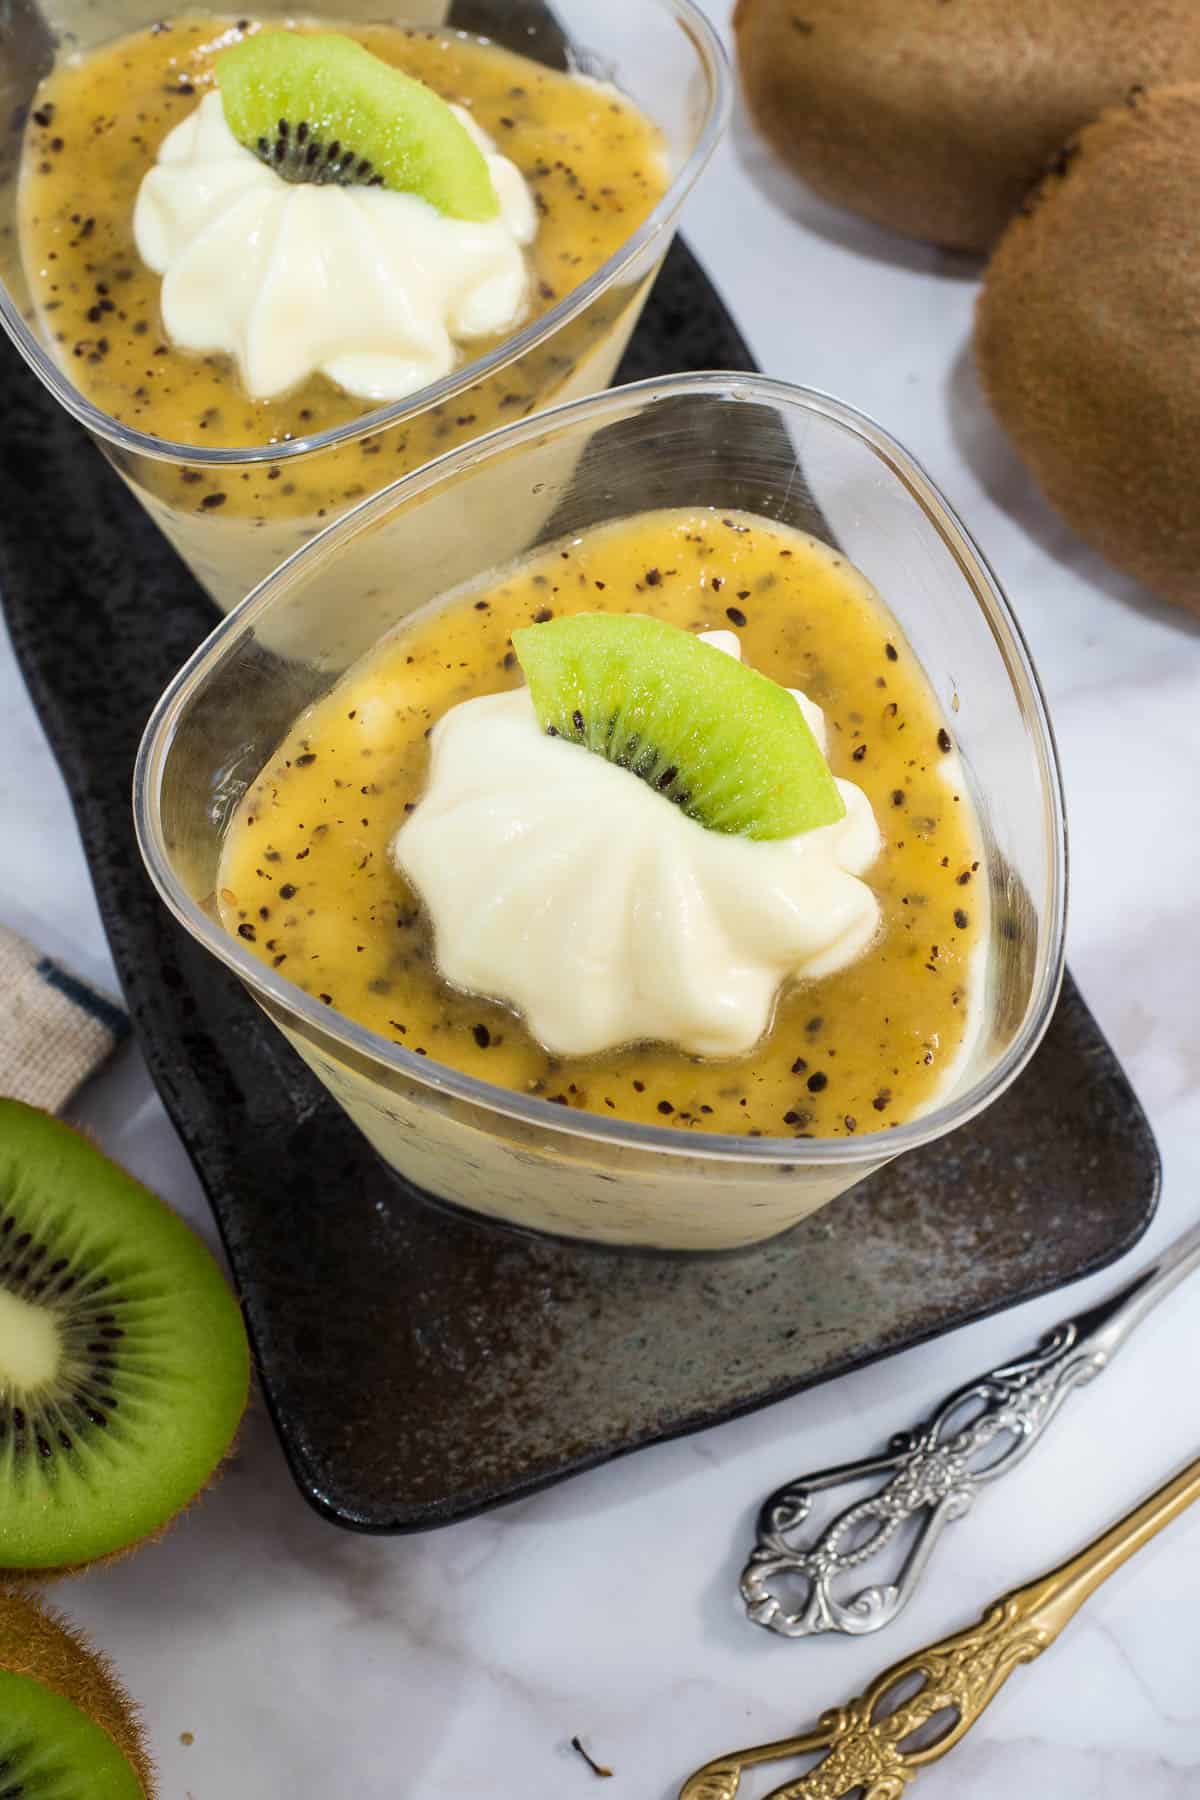 Top view of a cup of mousse with a slice of kiwi on top.